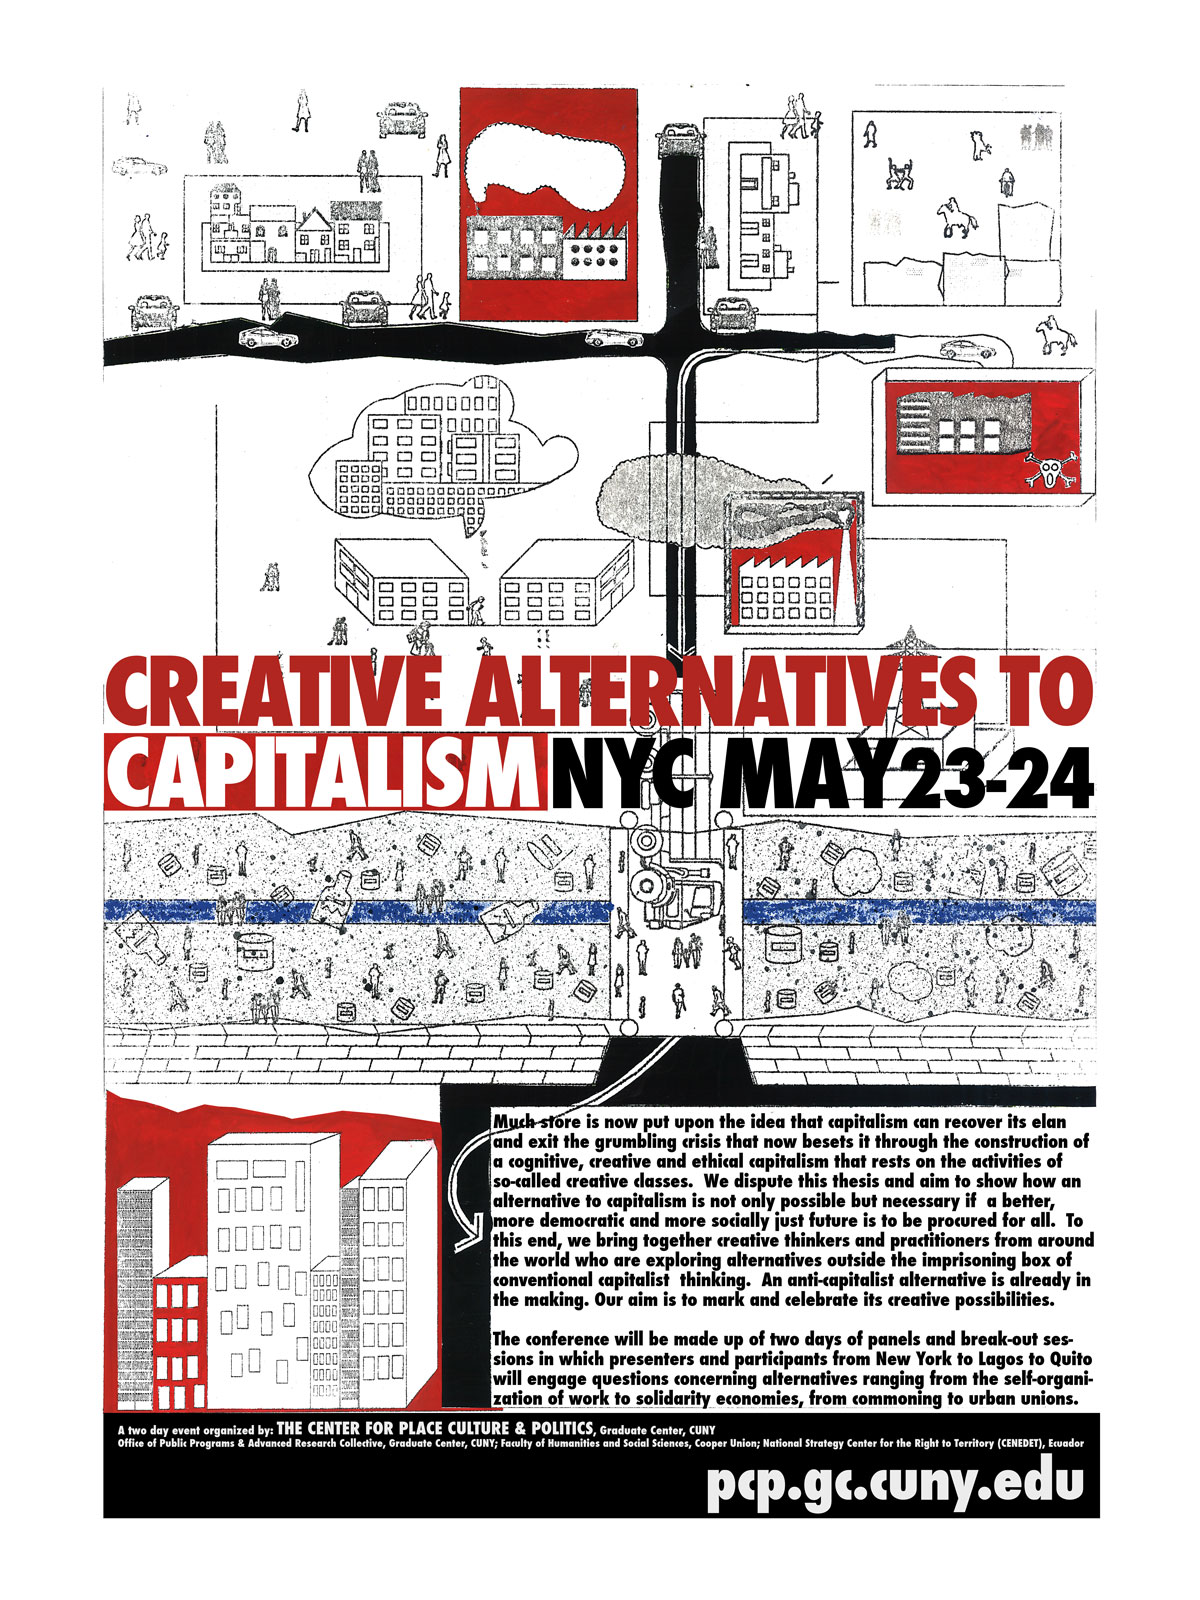 Creative Alternatives to Capitalism Conference